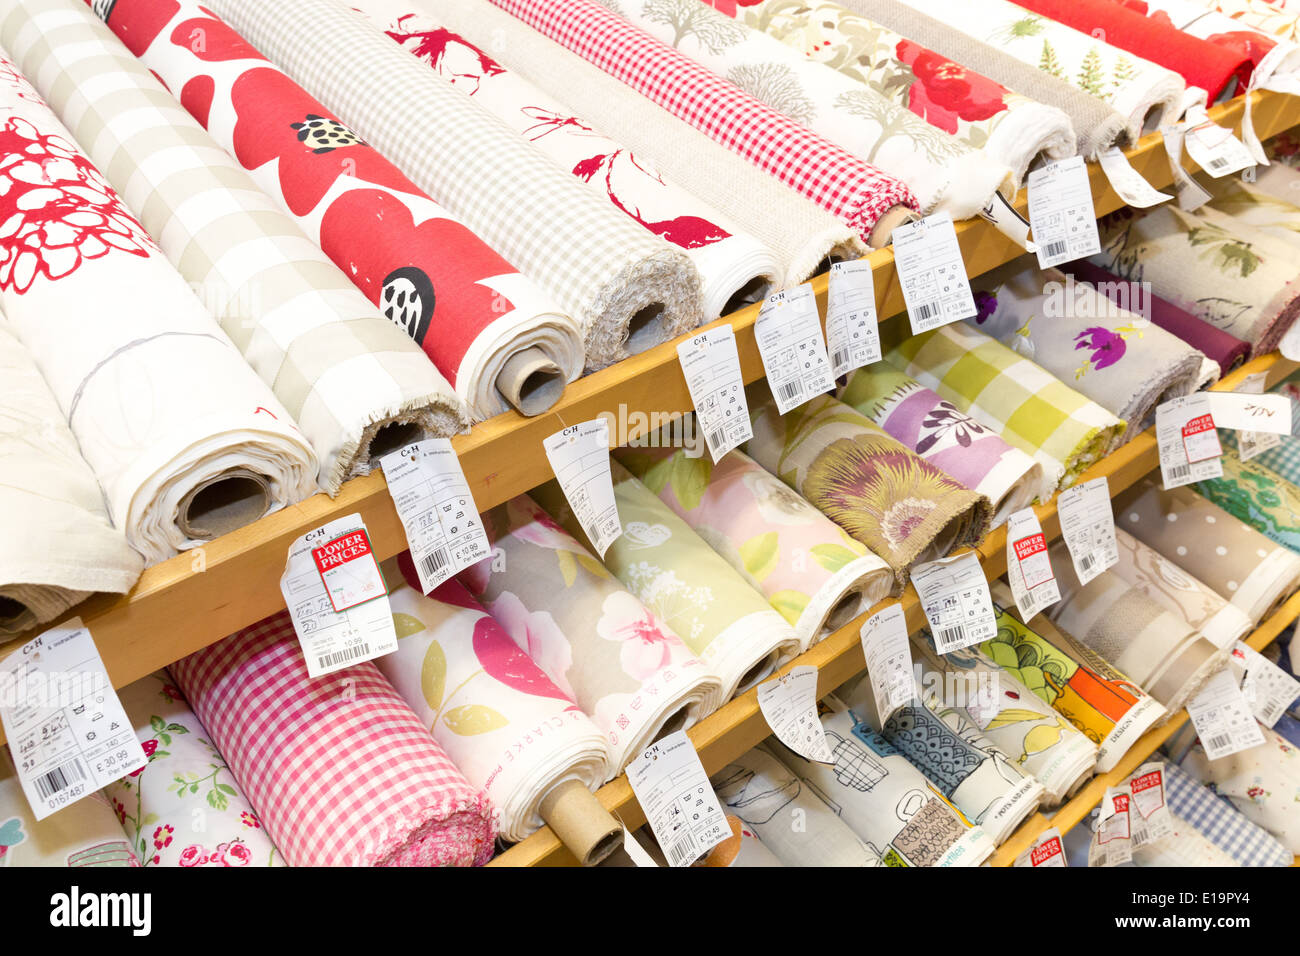 rolls of patterned sewing fabric shelf Stock Photo